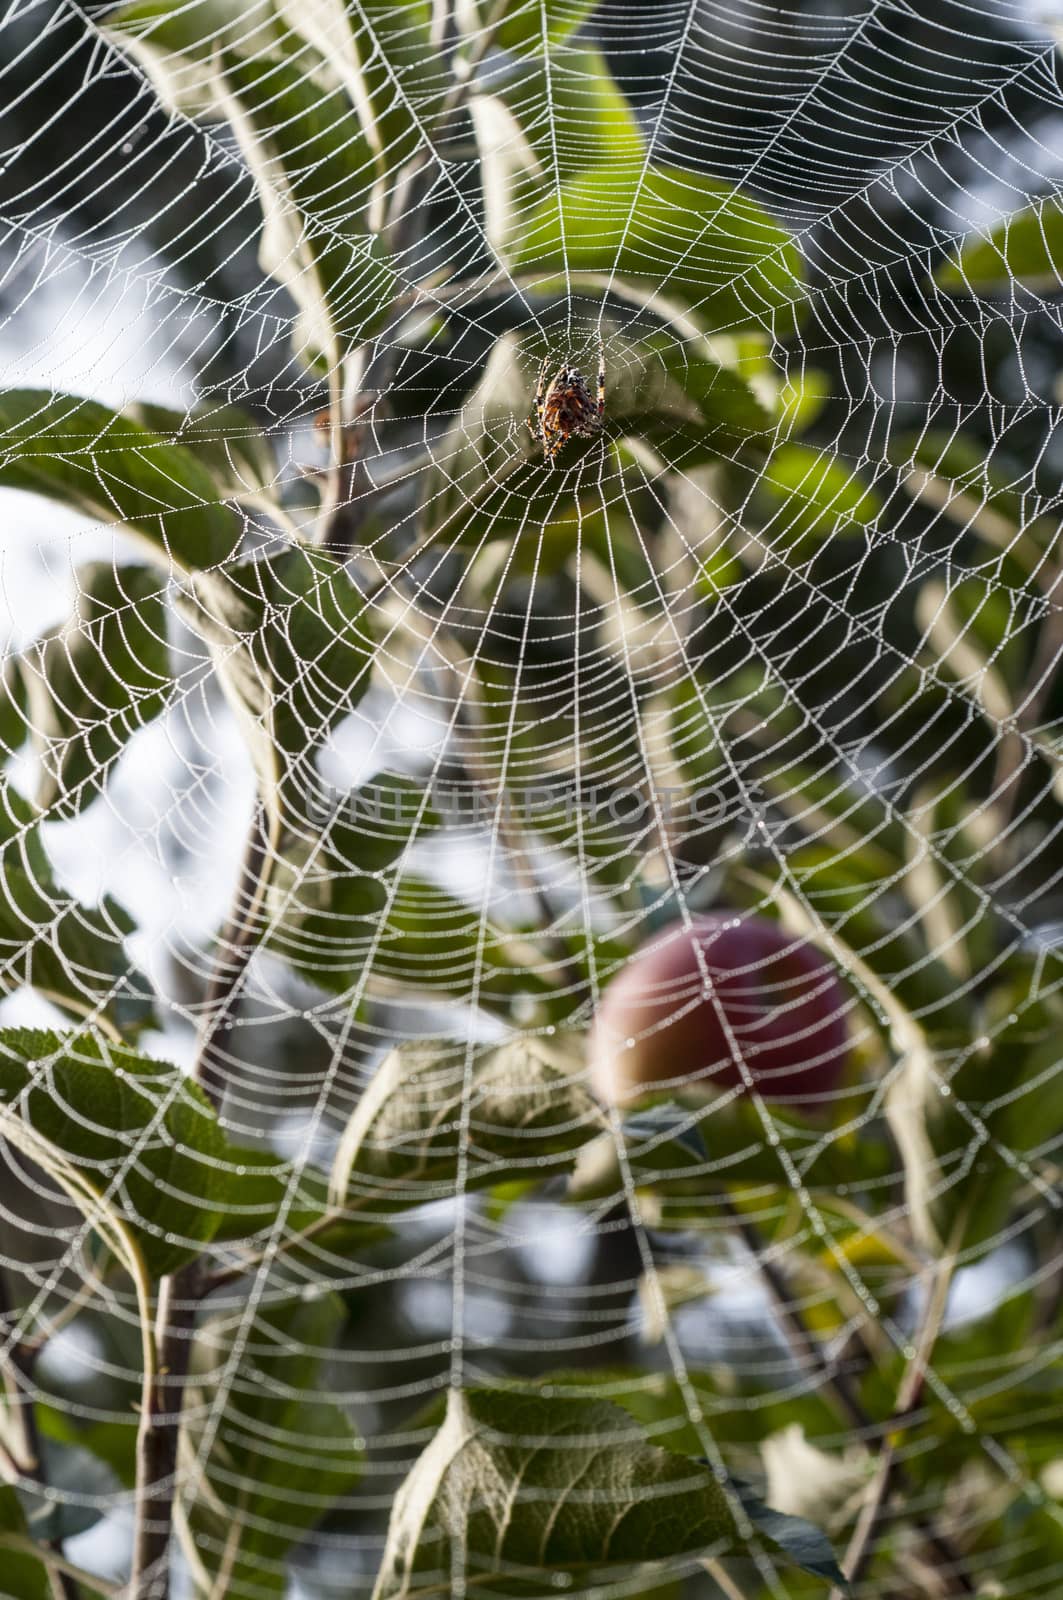 Spider hanging in center of web strung from trees with morning dew drops